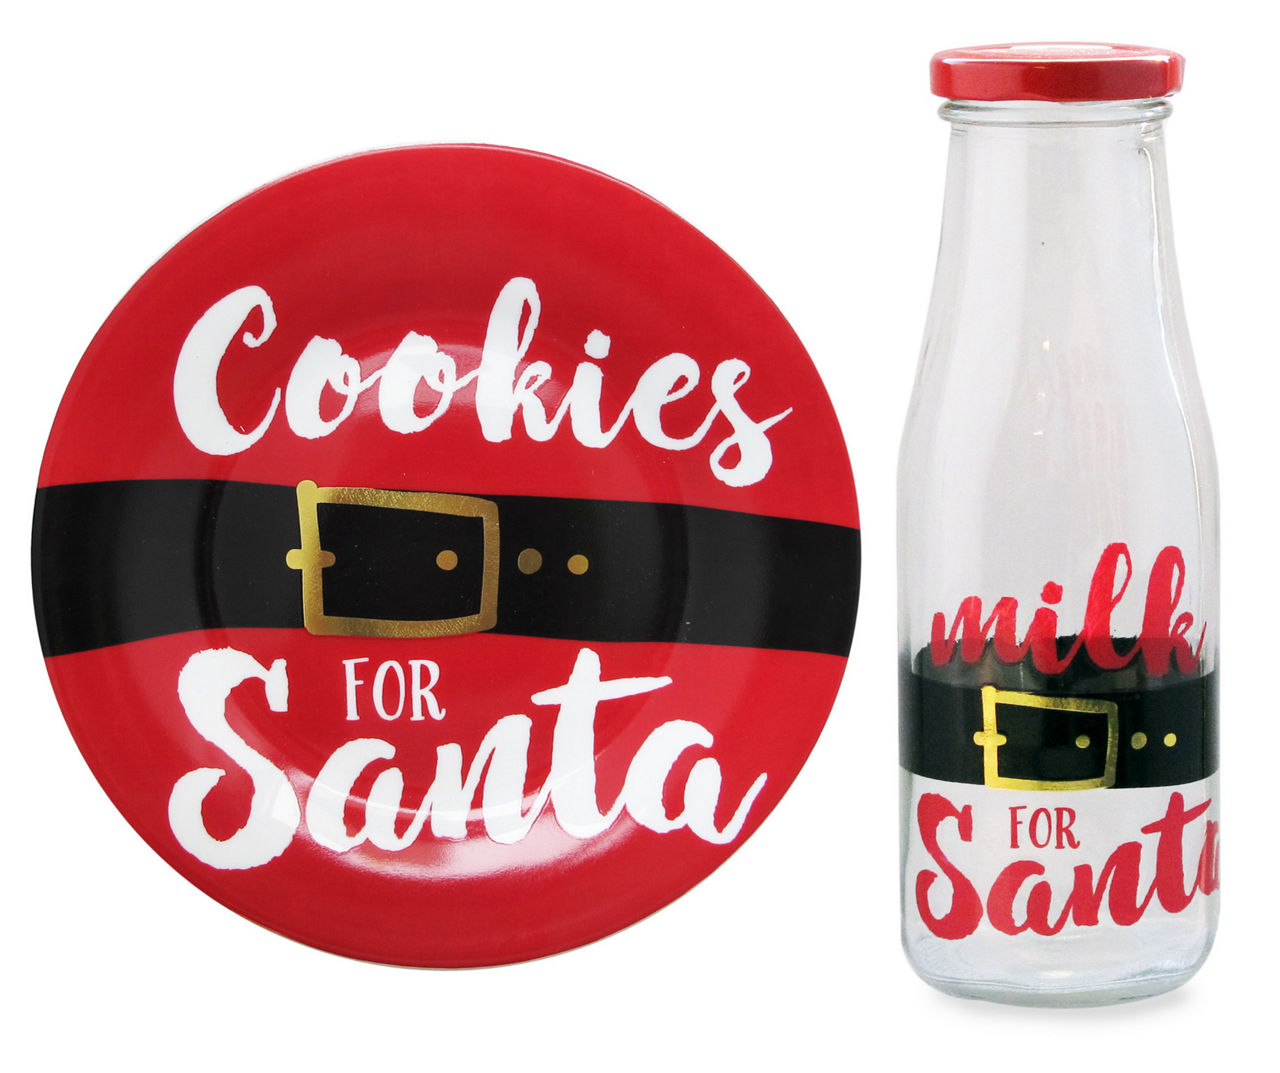 Santa's Cookies Glass Cookie Jar ~ Made in the USA